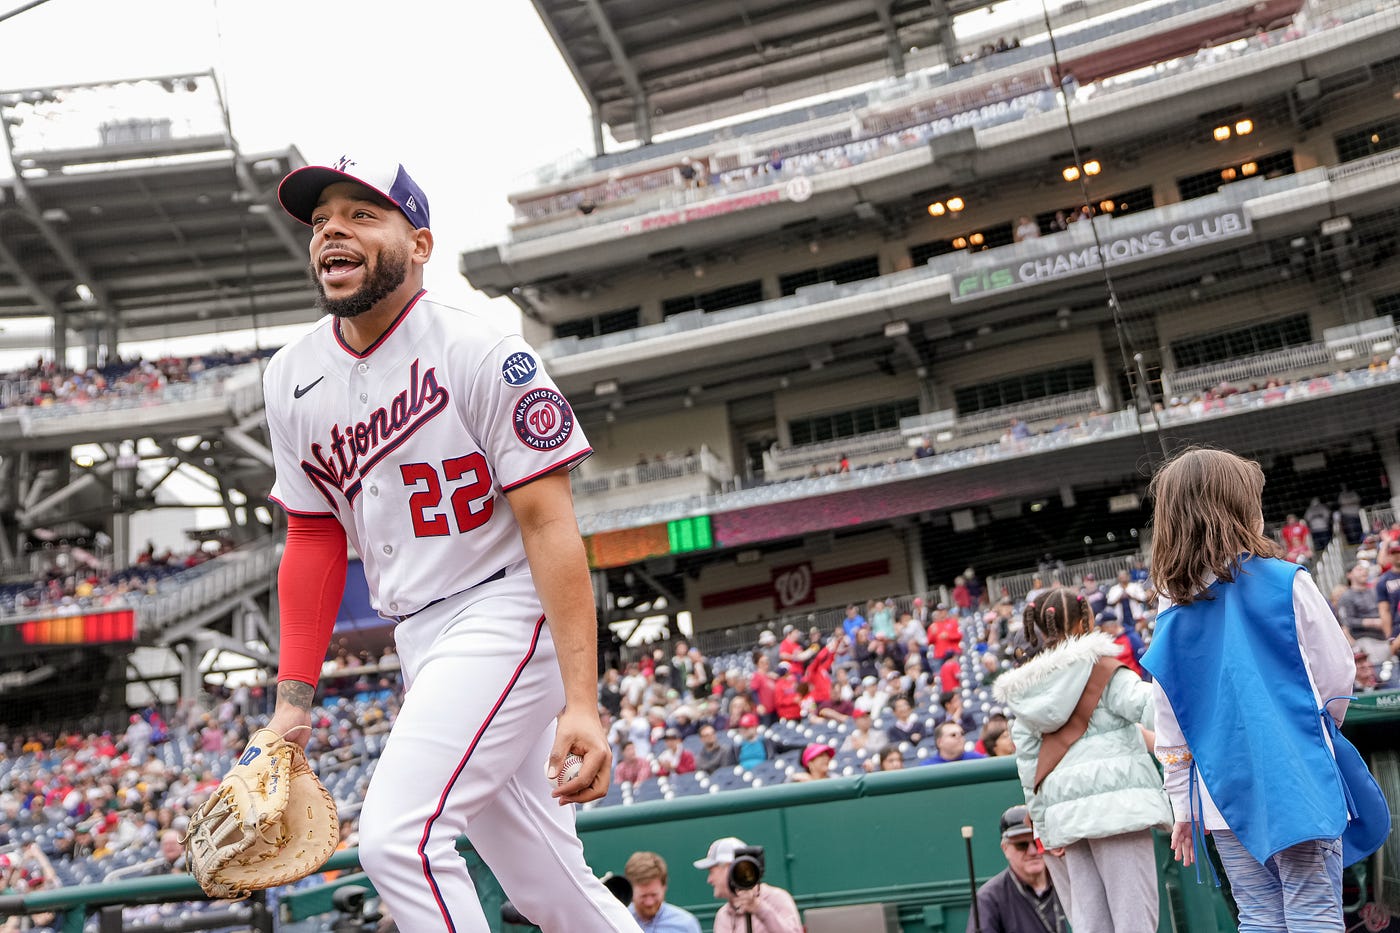 Nationals close out road trip with three-game series at Giants